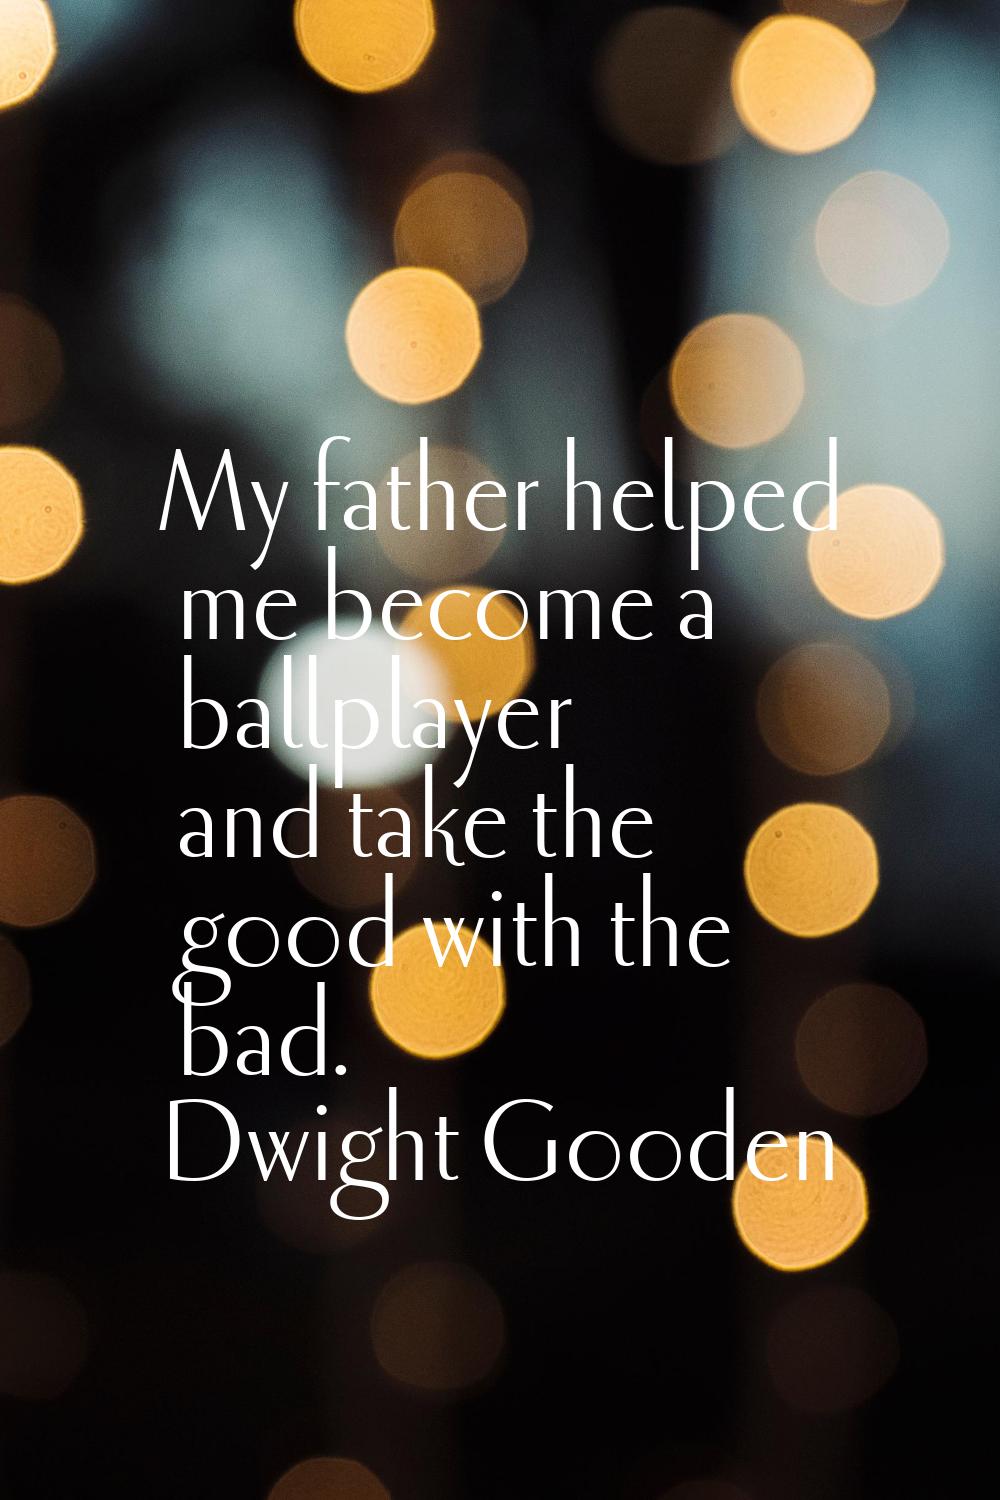 My father helped me become a ballplayer and take the good with the bad.